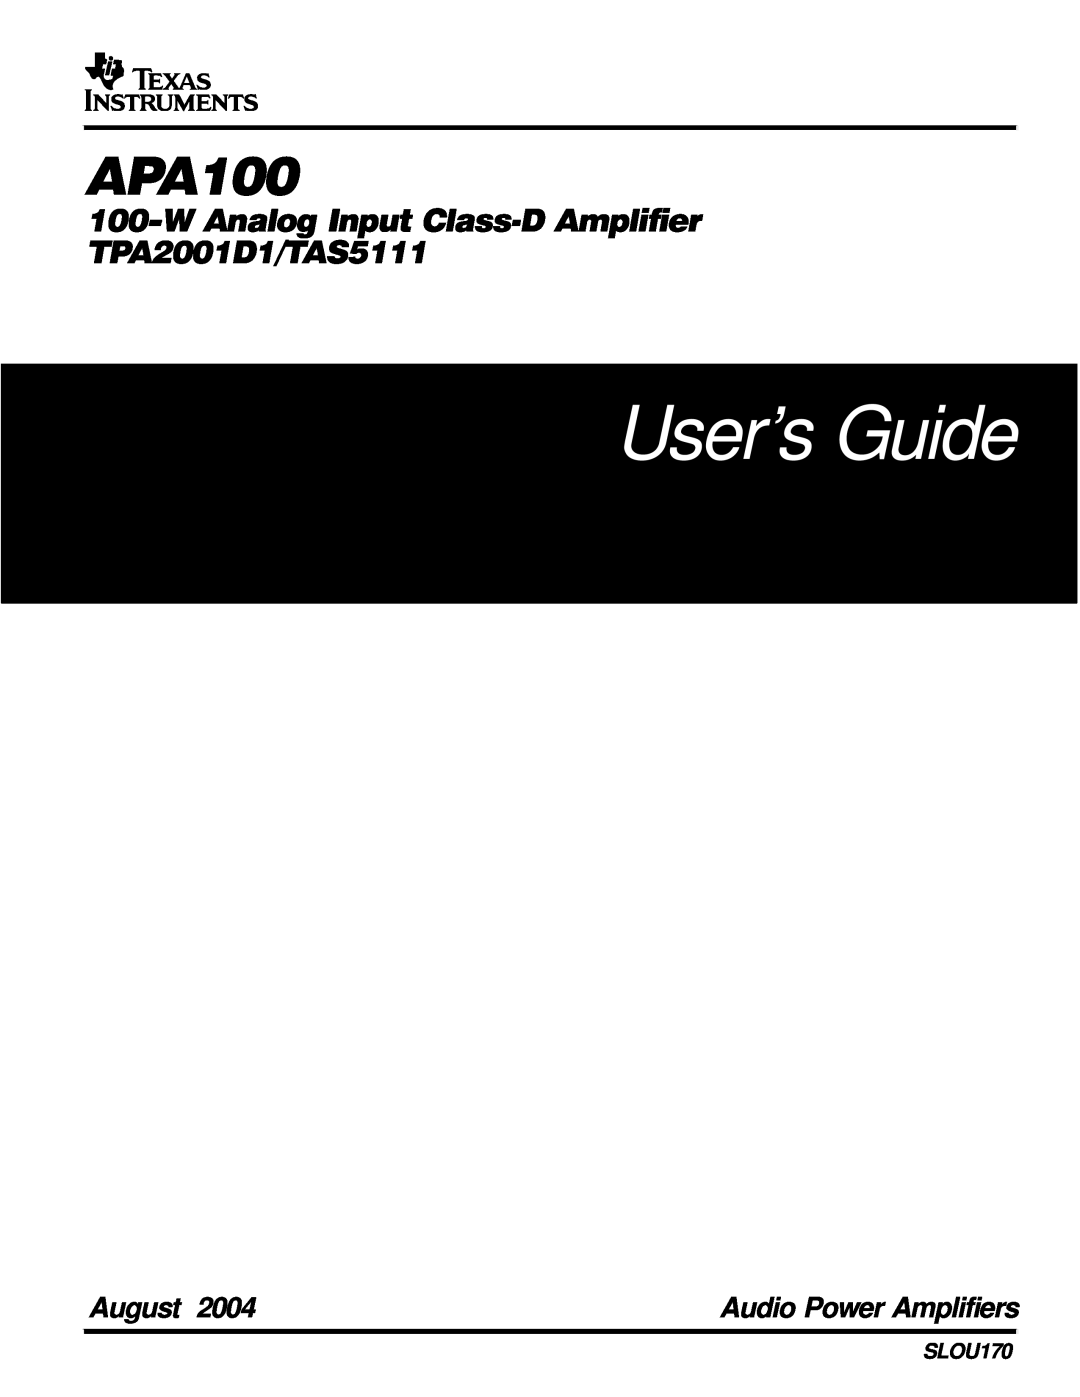 Texas Instruments APA100 manual User’s Guide, August, Audio Power Amplifiers, SLOU170 